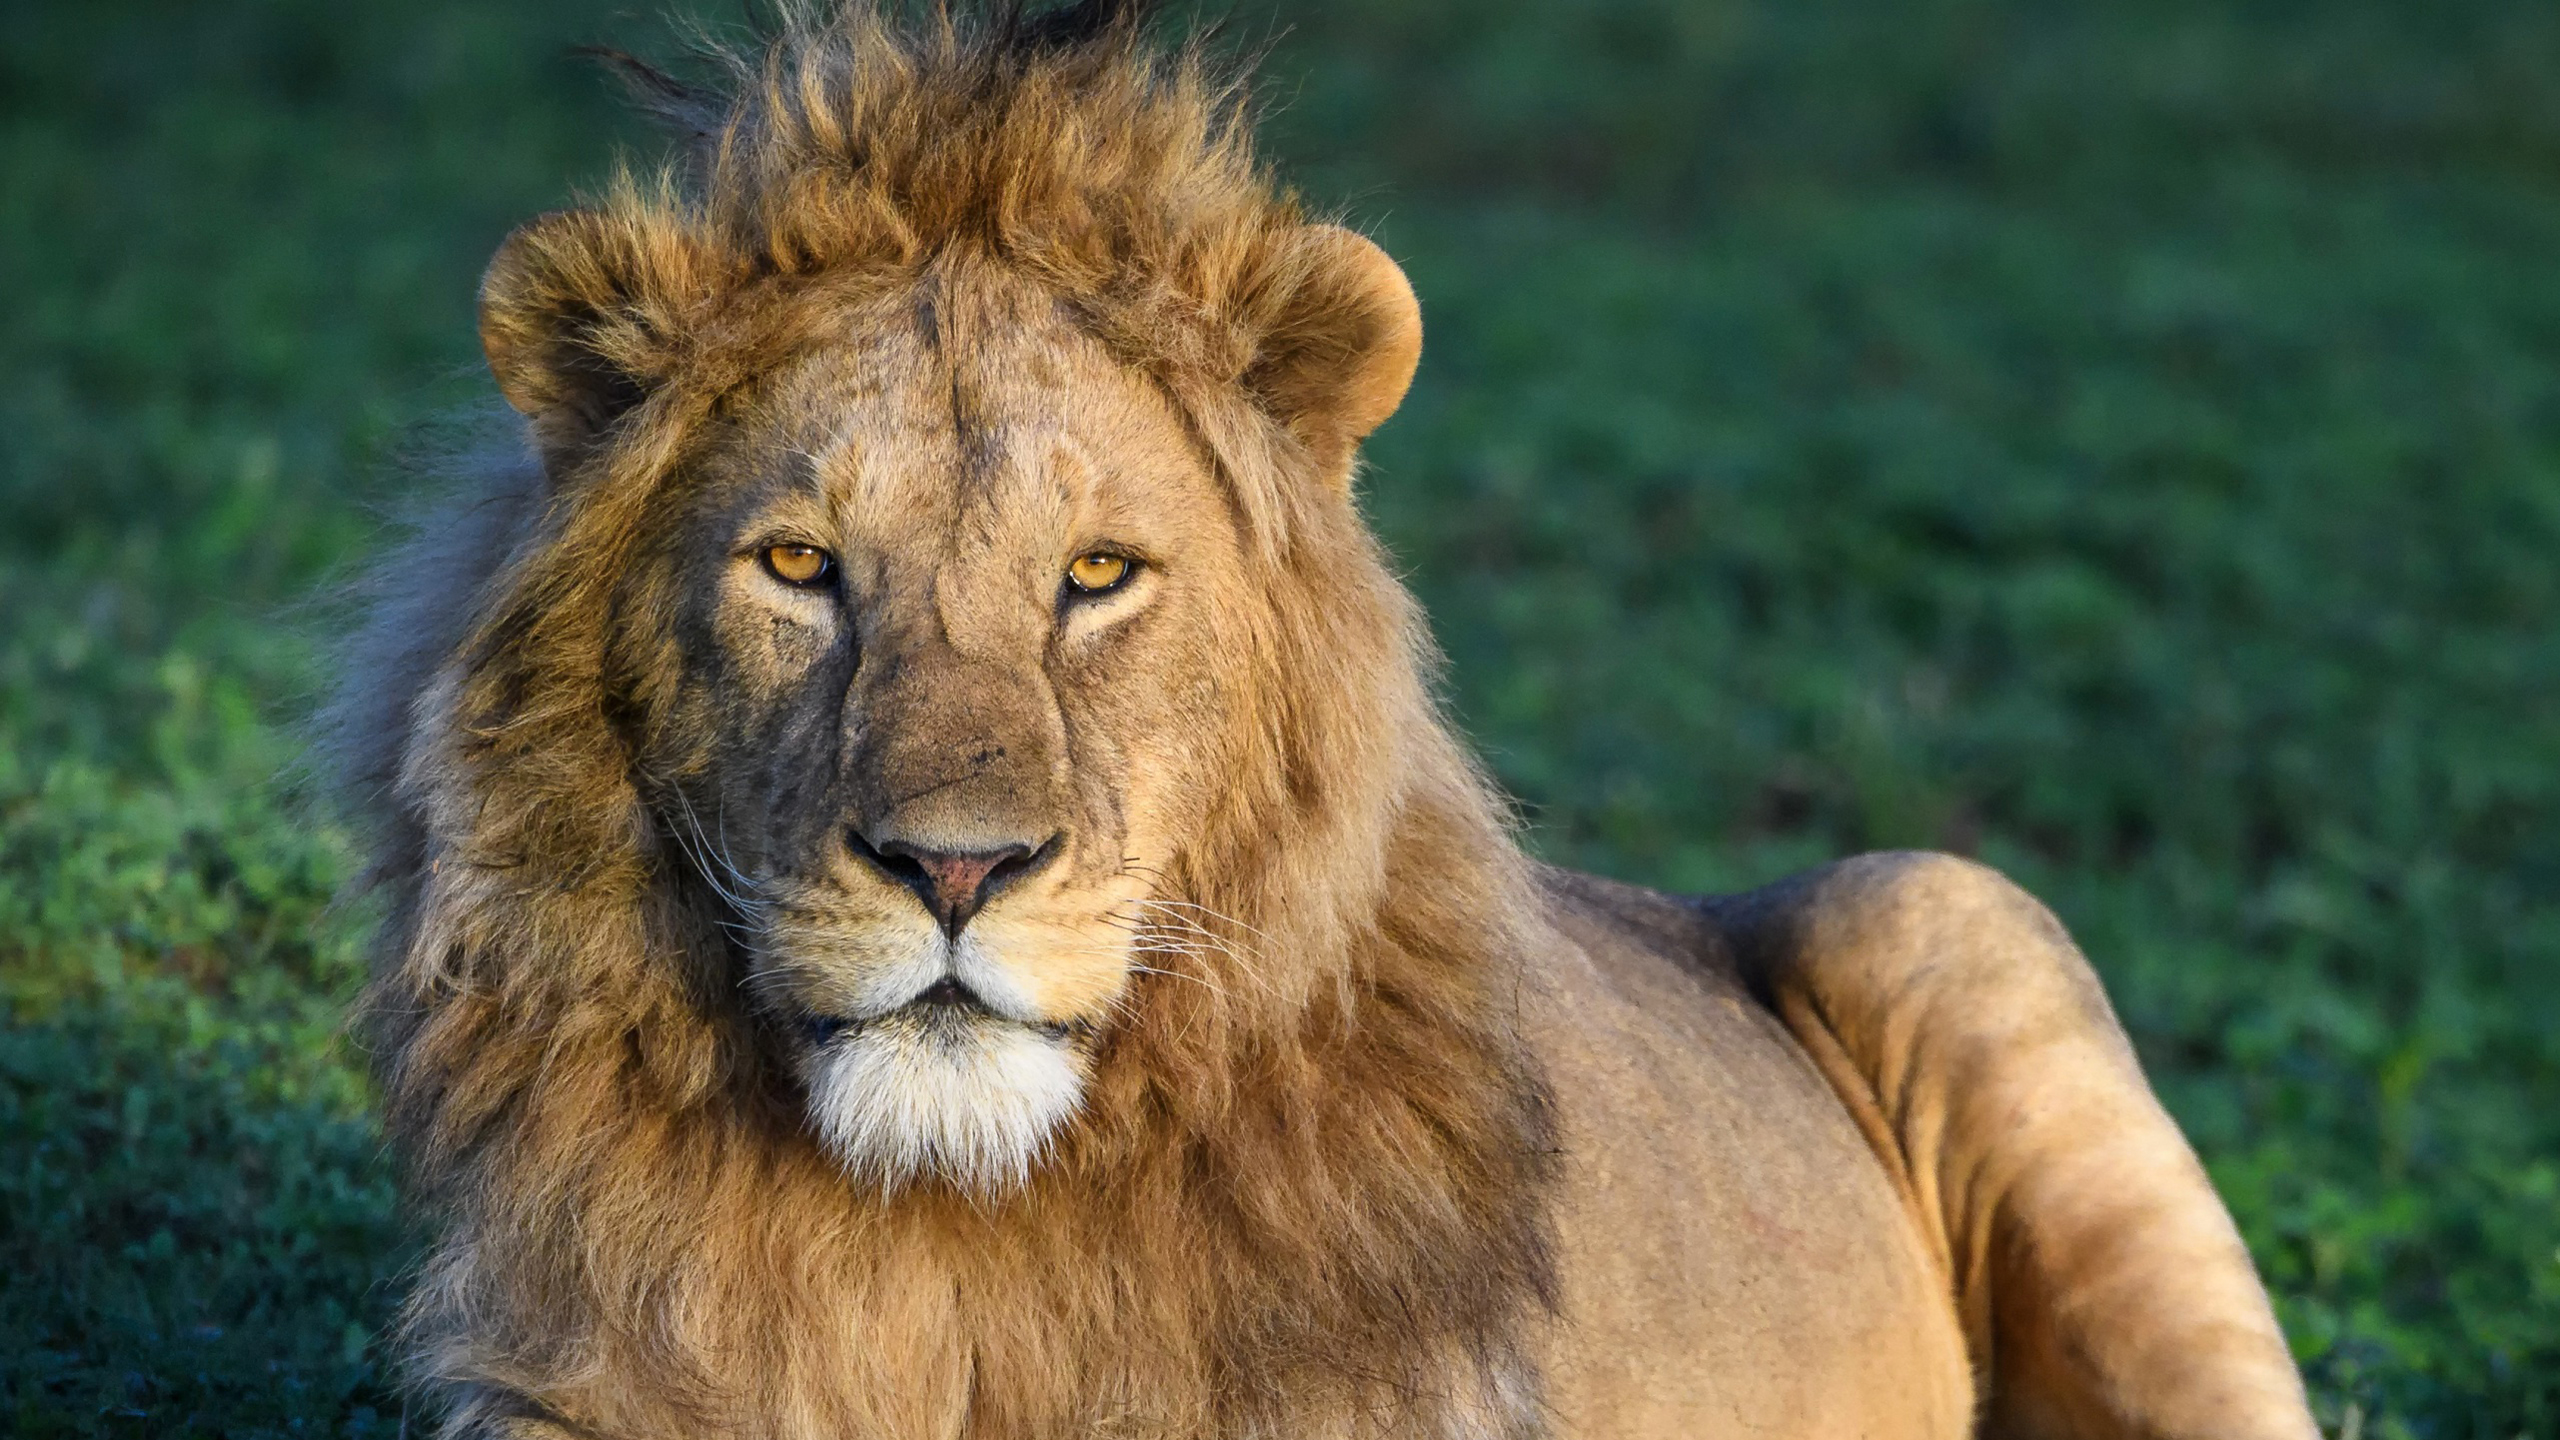 Lion Is Sitting With Wallpaper Of Green Grass HD Lion